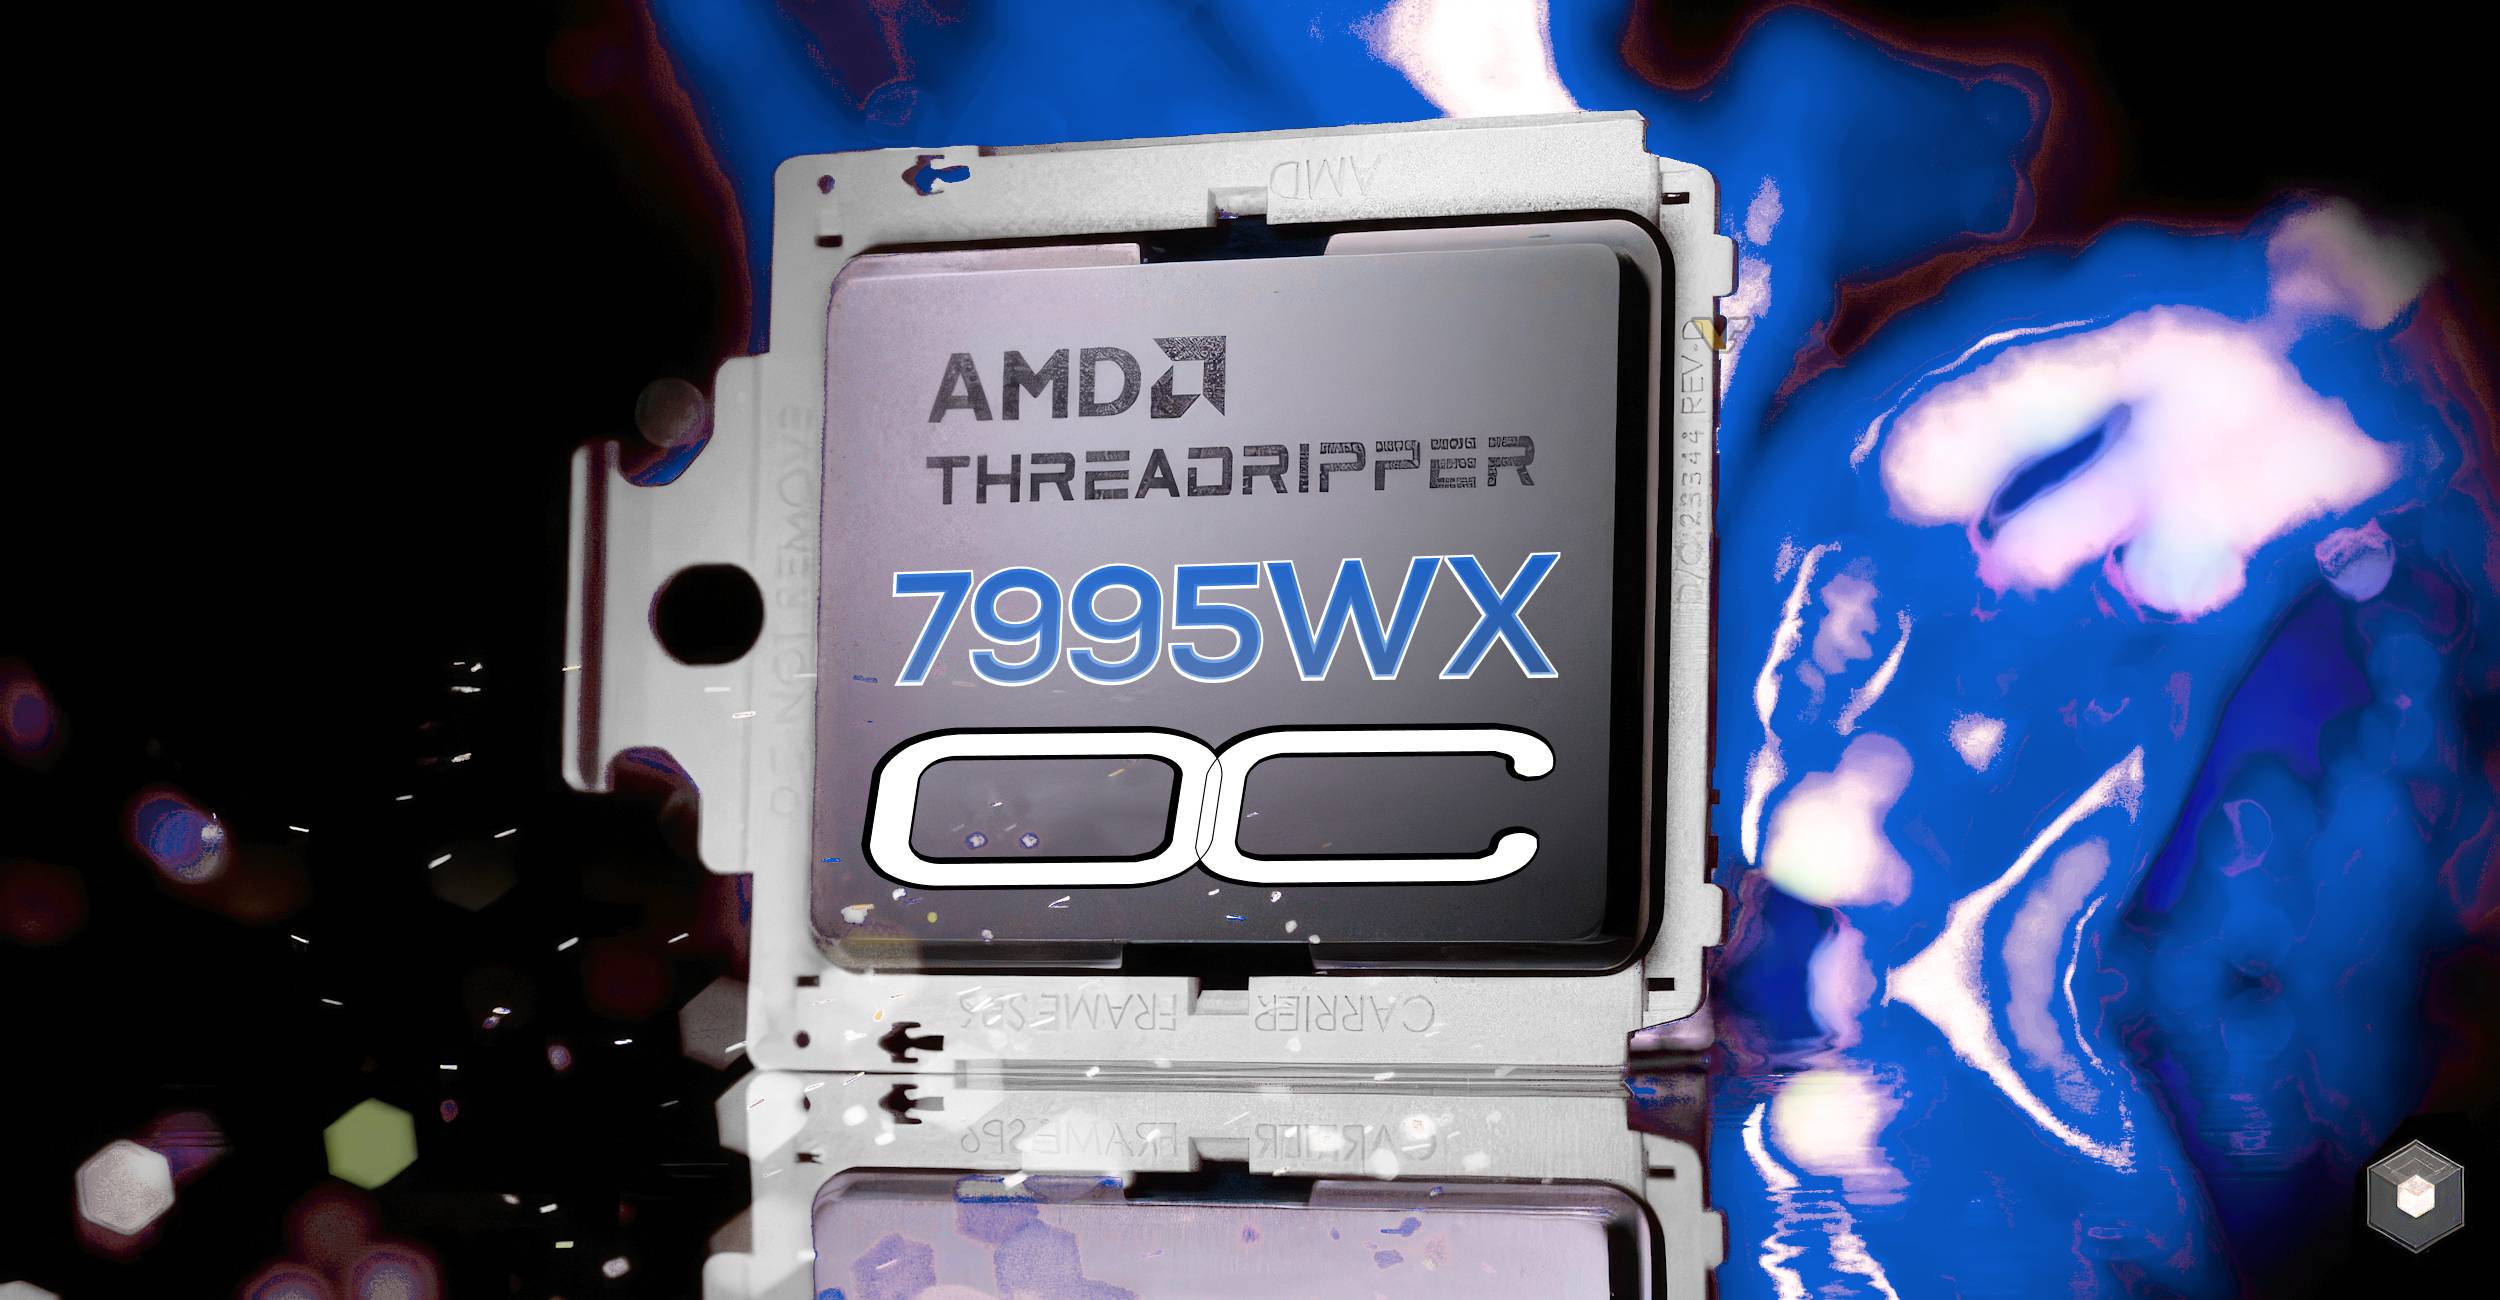 AMD's new 64-core Threadripper CPU will cost nearly $4,000 for the